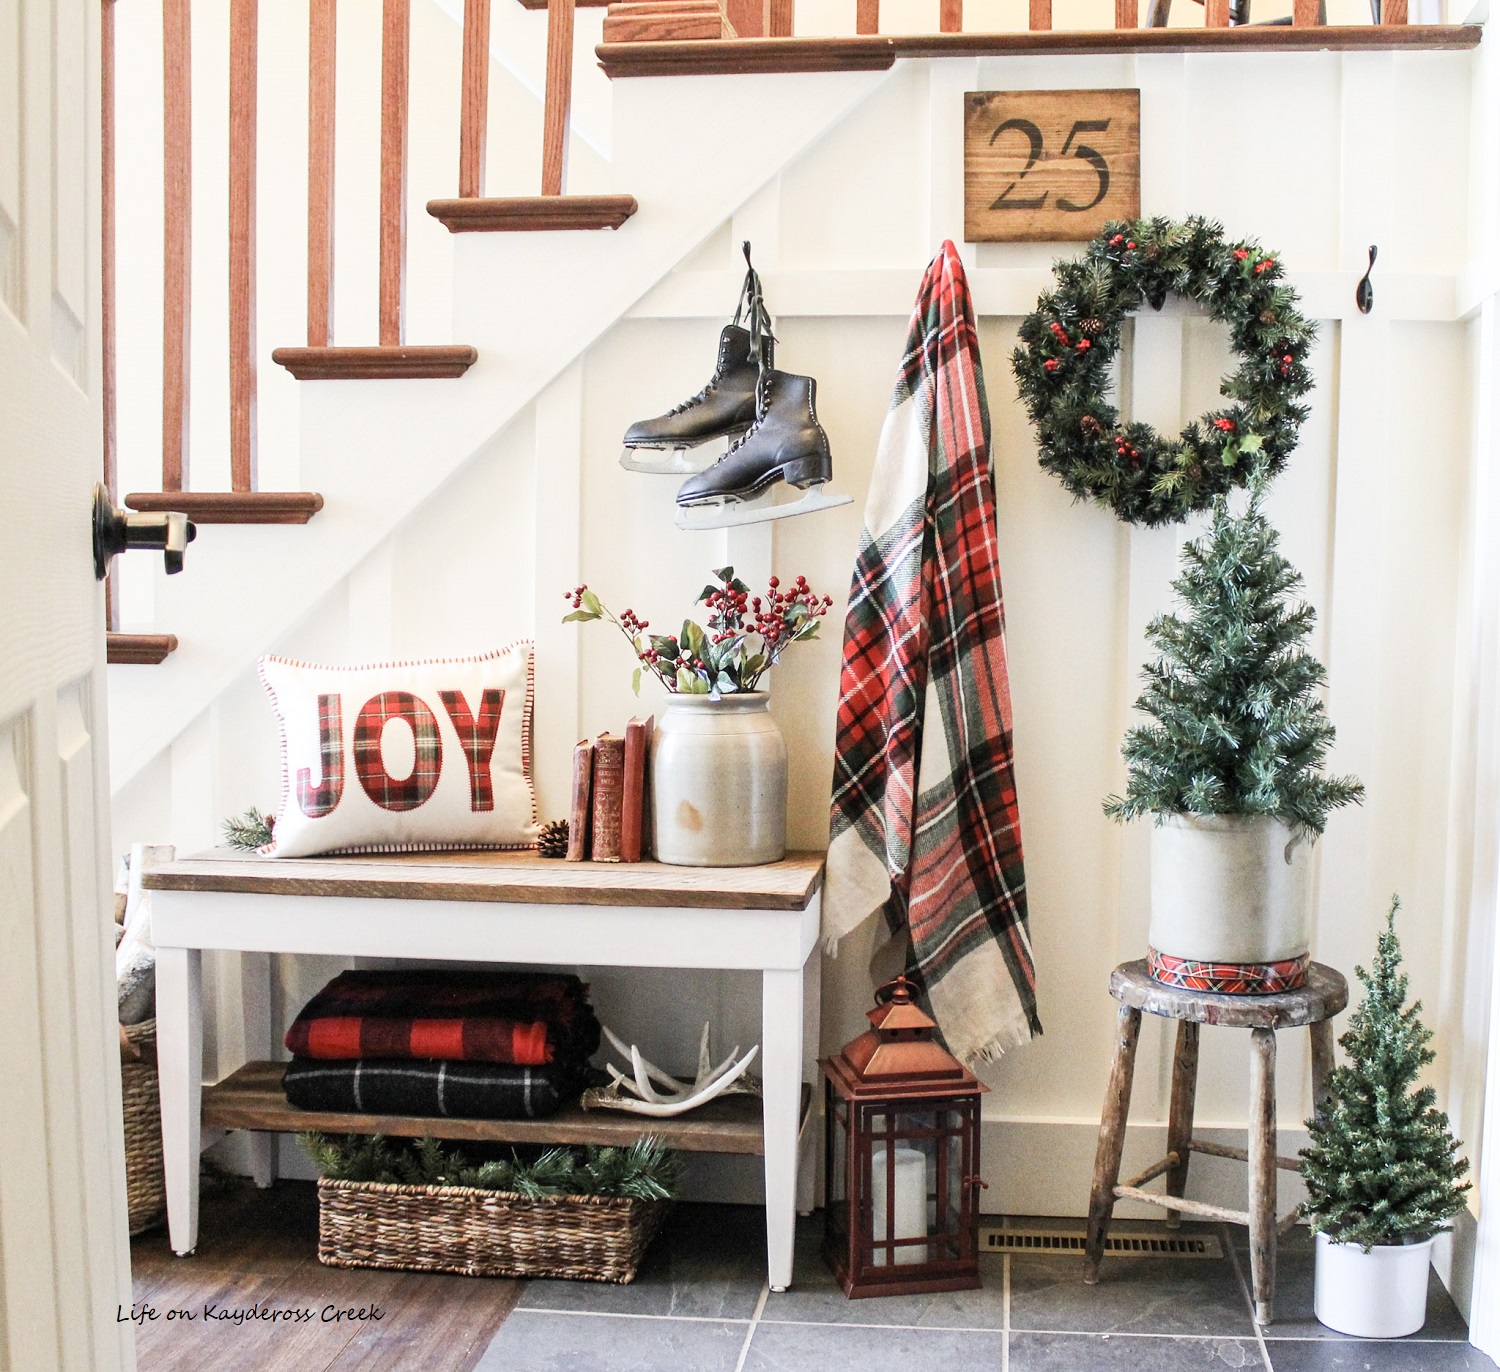 How to Decorate Your Home for Christmas - Life on Kaydeross Creek